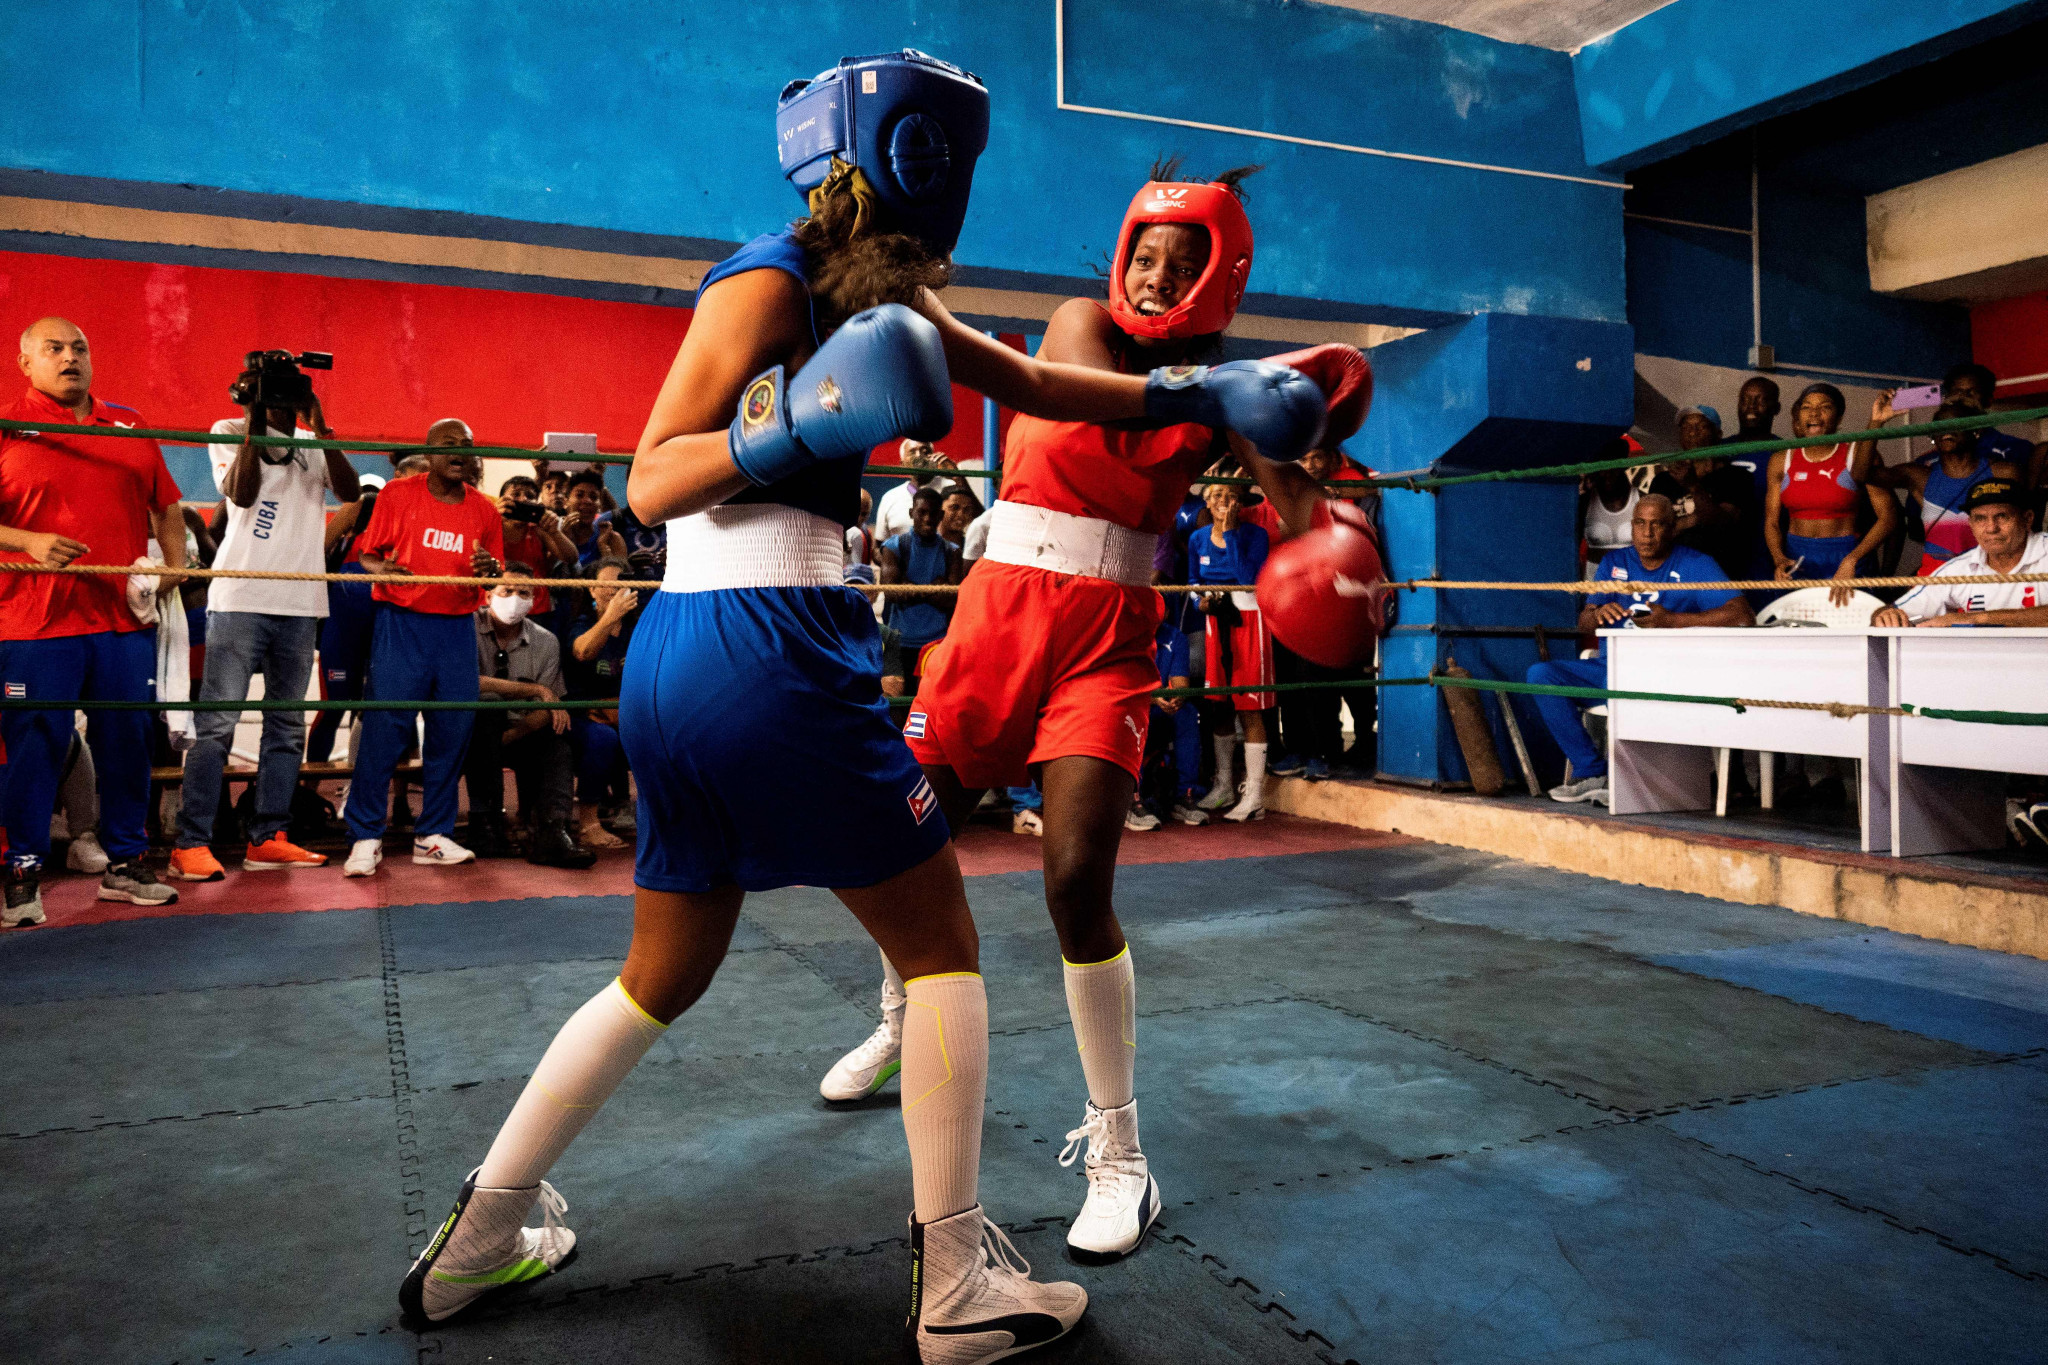 Cuban Boxing Federation President outlines "fundamental goal" for women's boxing in country